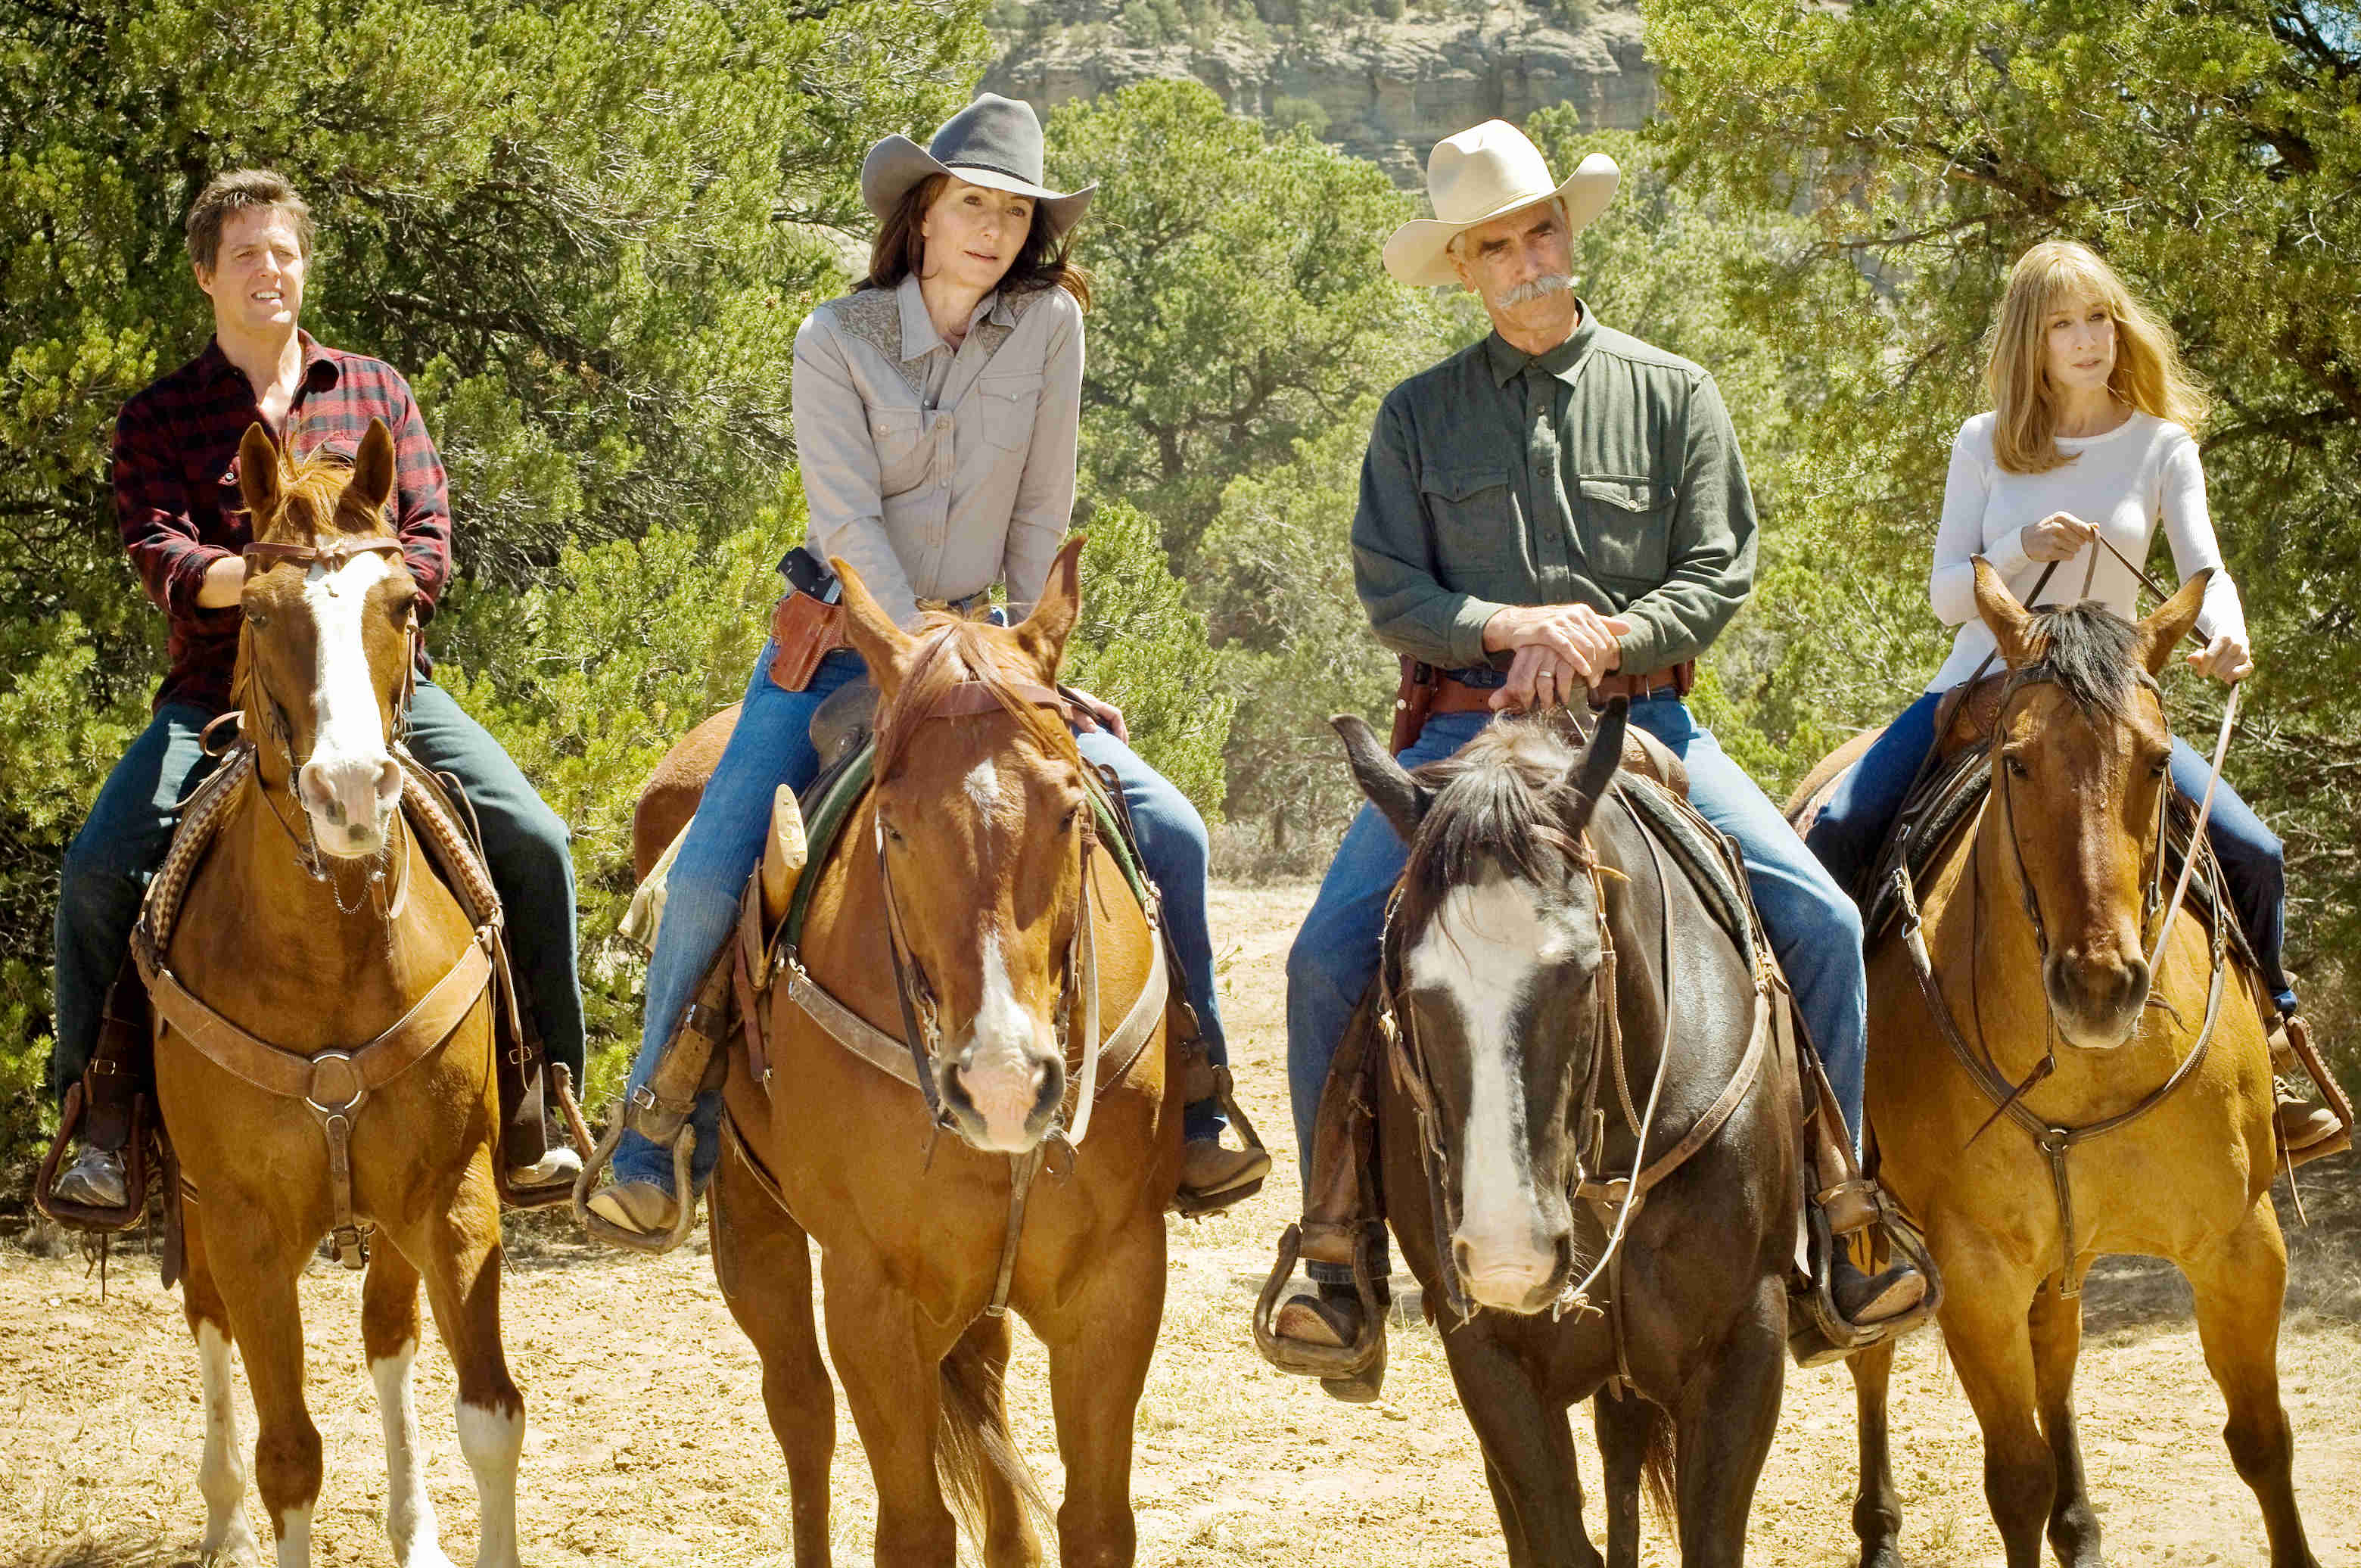 Hugh Grant, Mary Steenburgen, Sam Elliott and Sarah Jessica Parker in Columbia Pictures' Did You Hear About the Morgans? (2009)